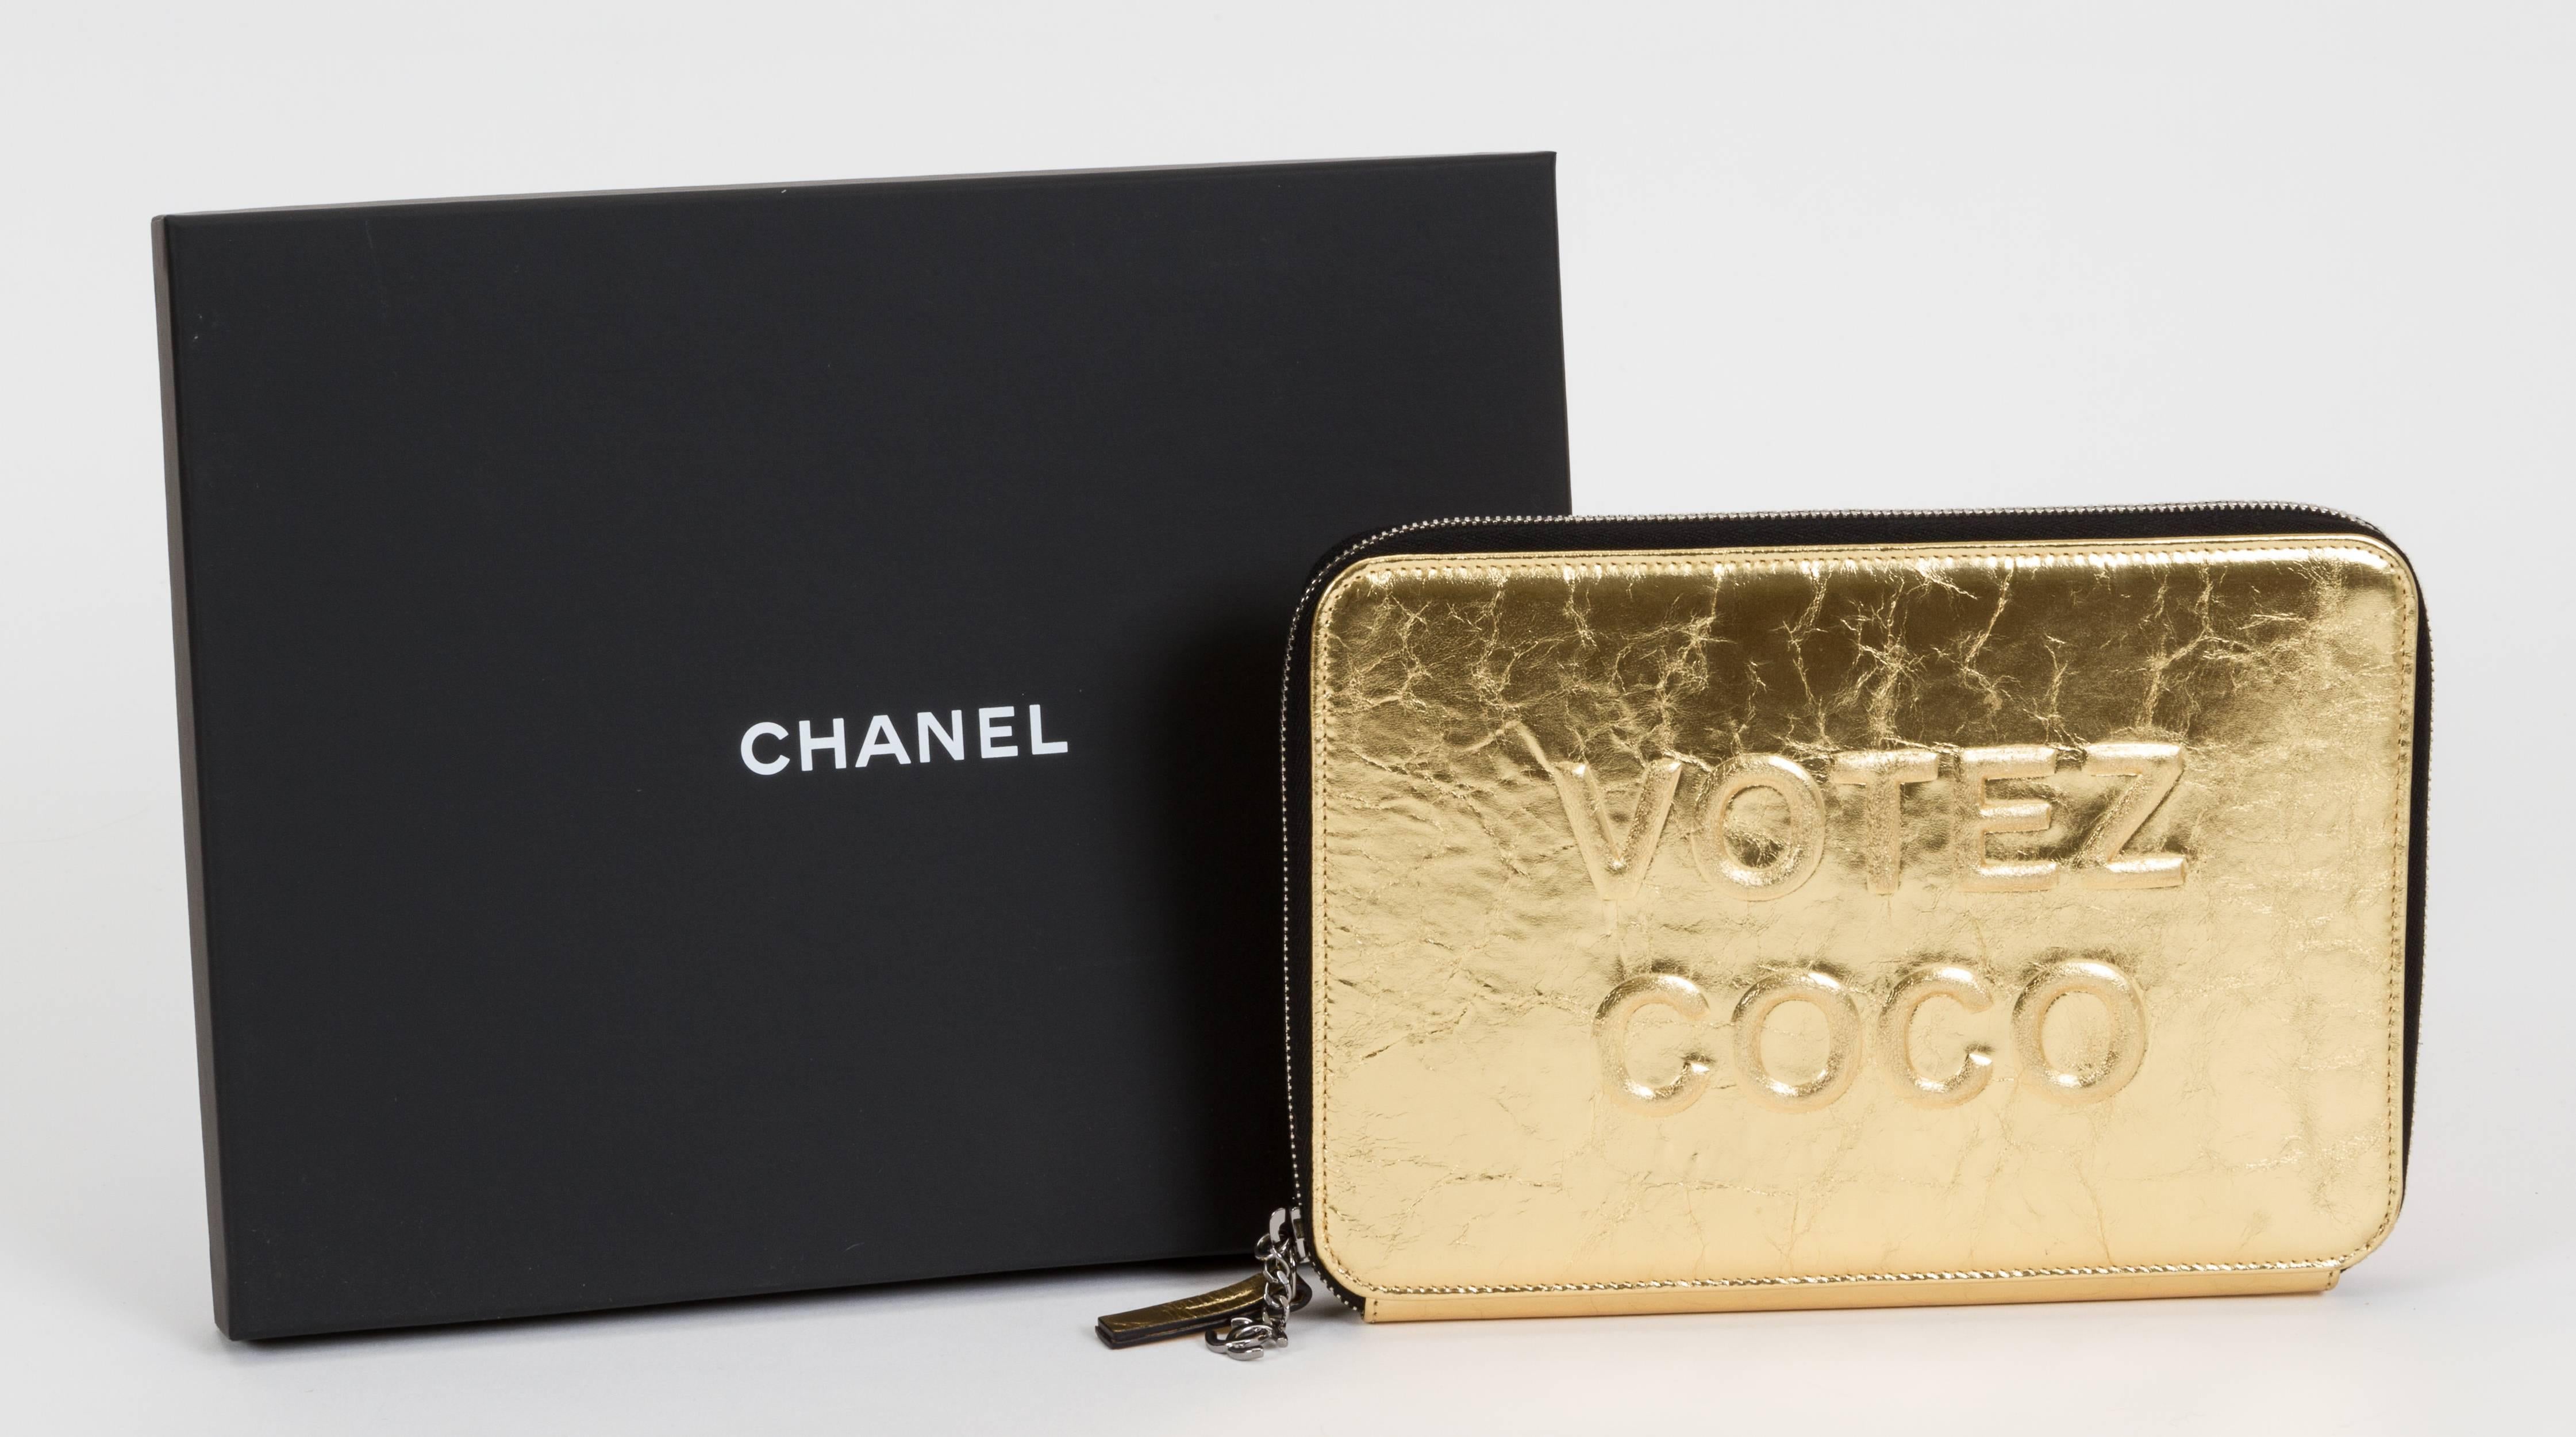 Chanel limited edition Votez Coco cracked gold leather clutch, zipped with credit card compartments. Brand new in box with hologram, ID card, booklet, velvet dust cover, and box.
